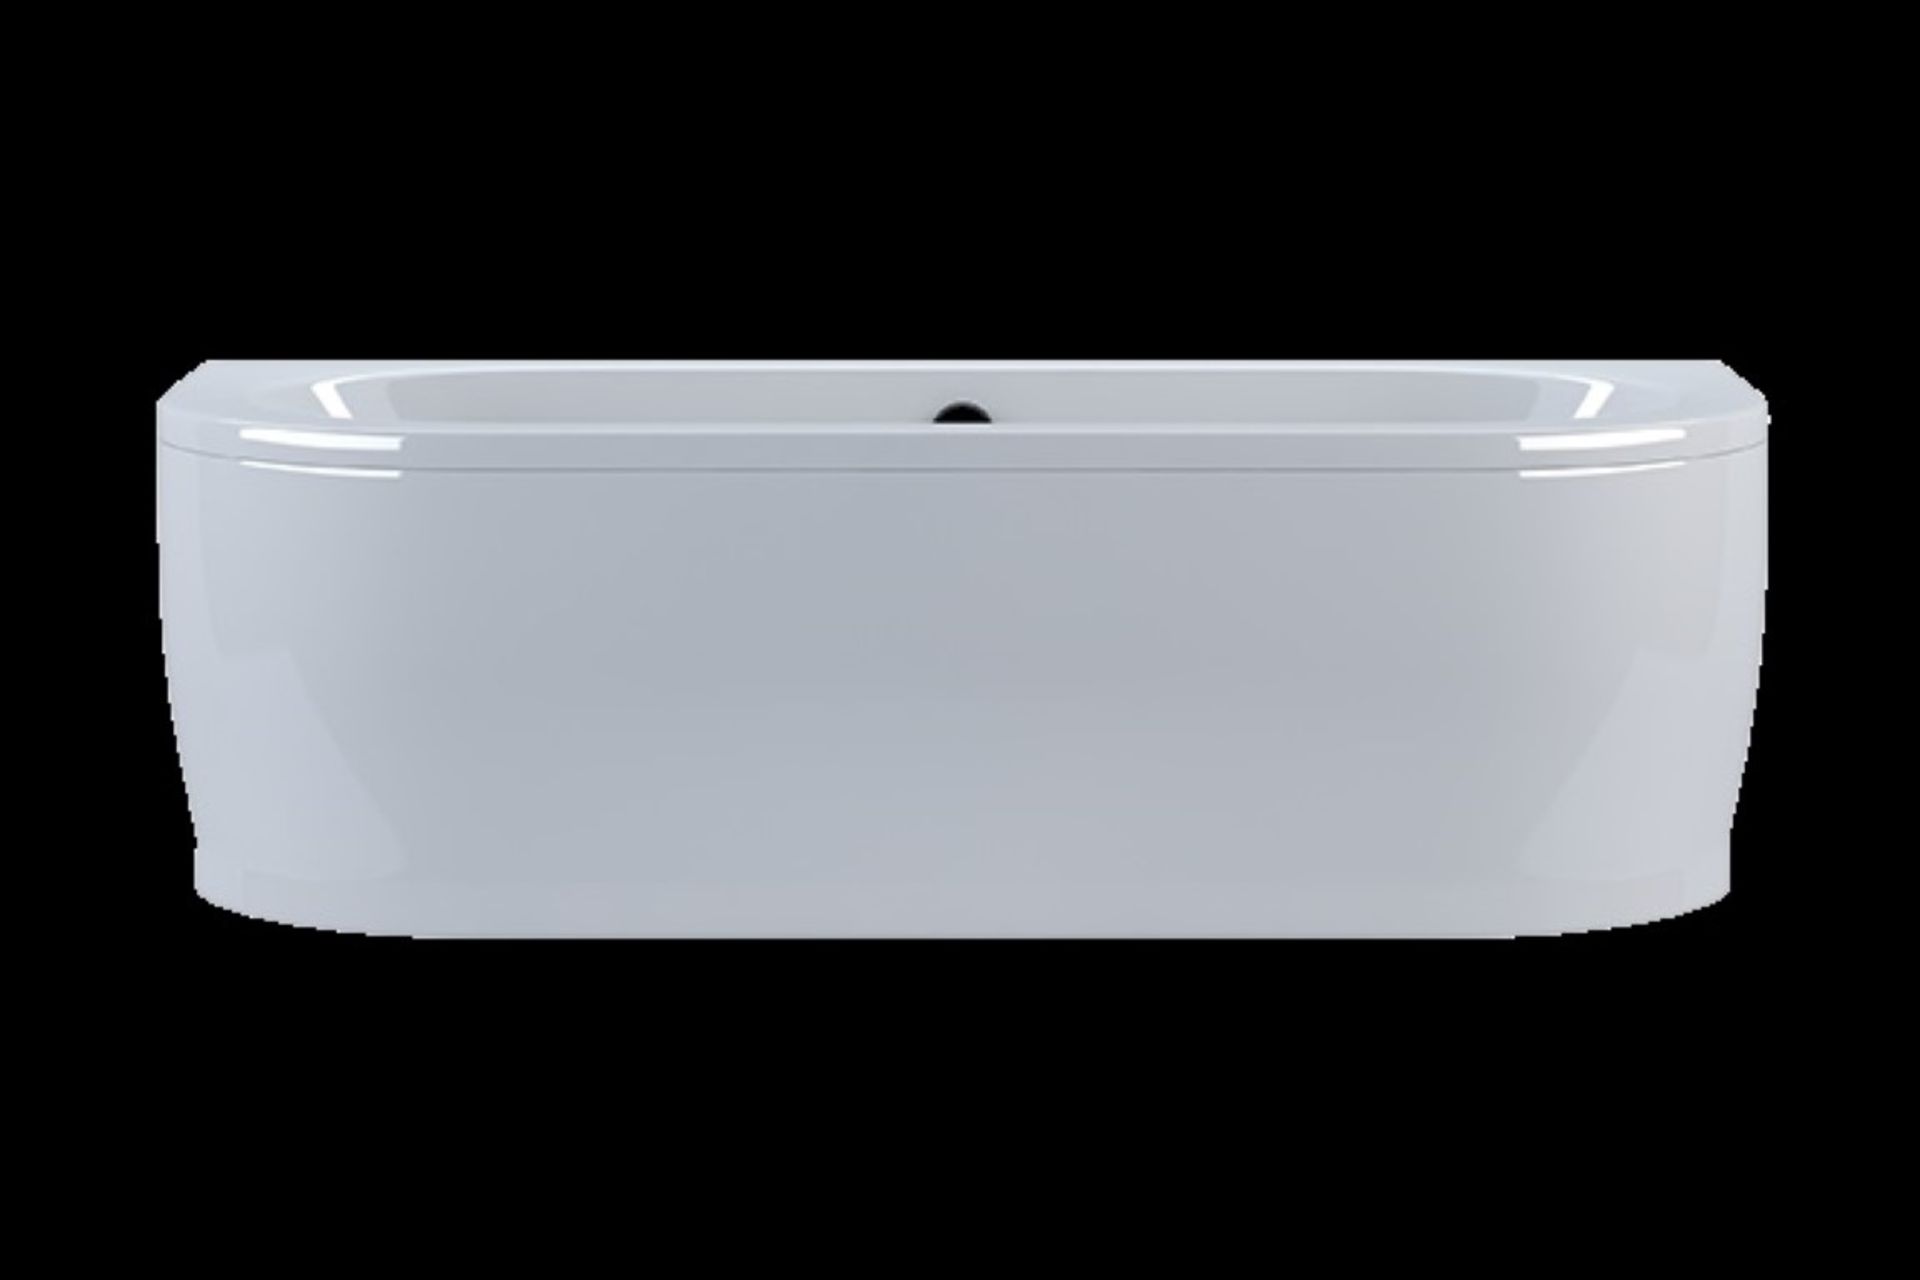 1 x "Palladio" BACK TO WALL BATH - Stylish Curvaceous Design - White Acrylic - 1700 X 750MM - - Image 3 of 9